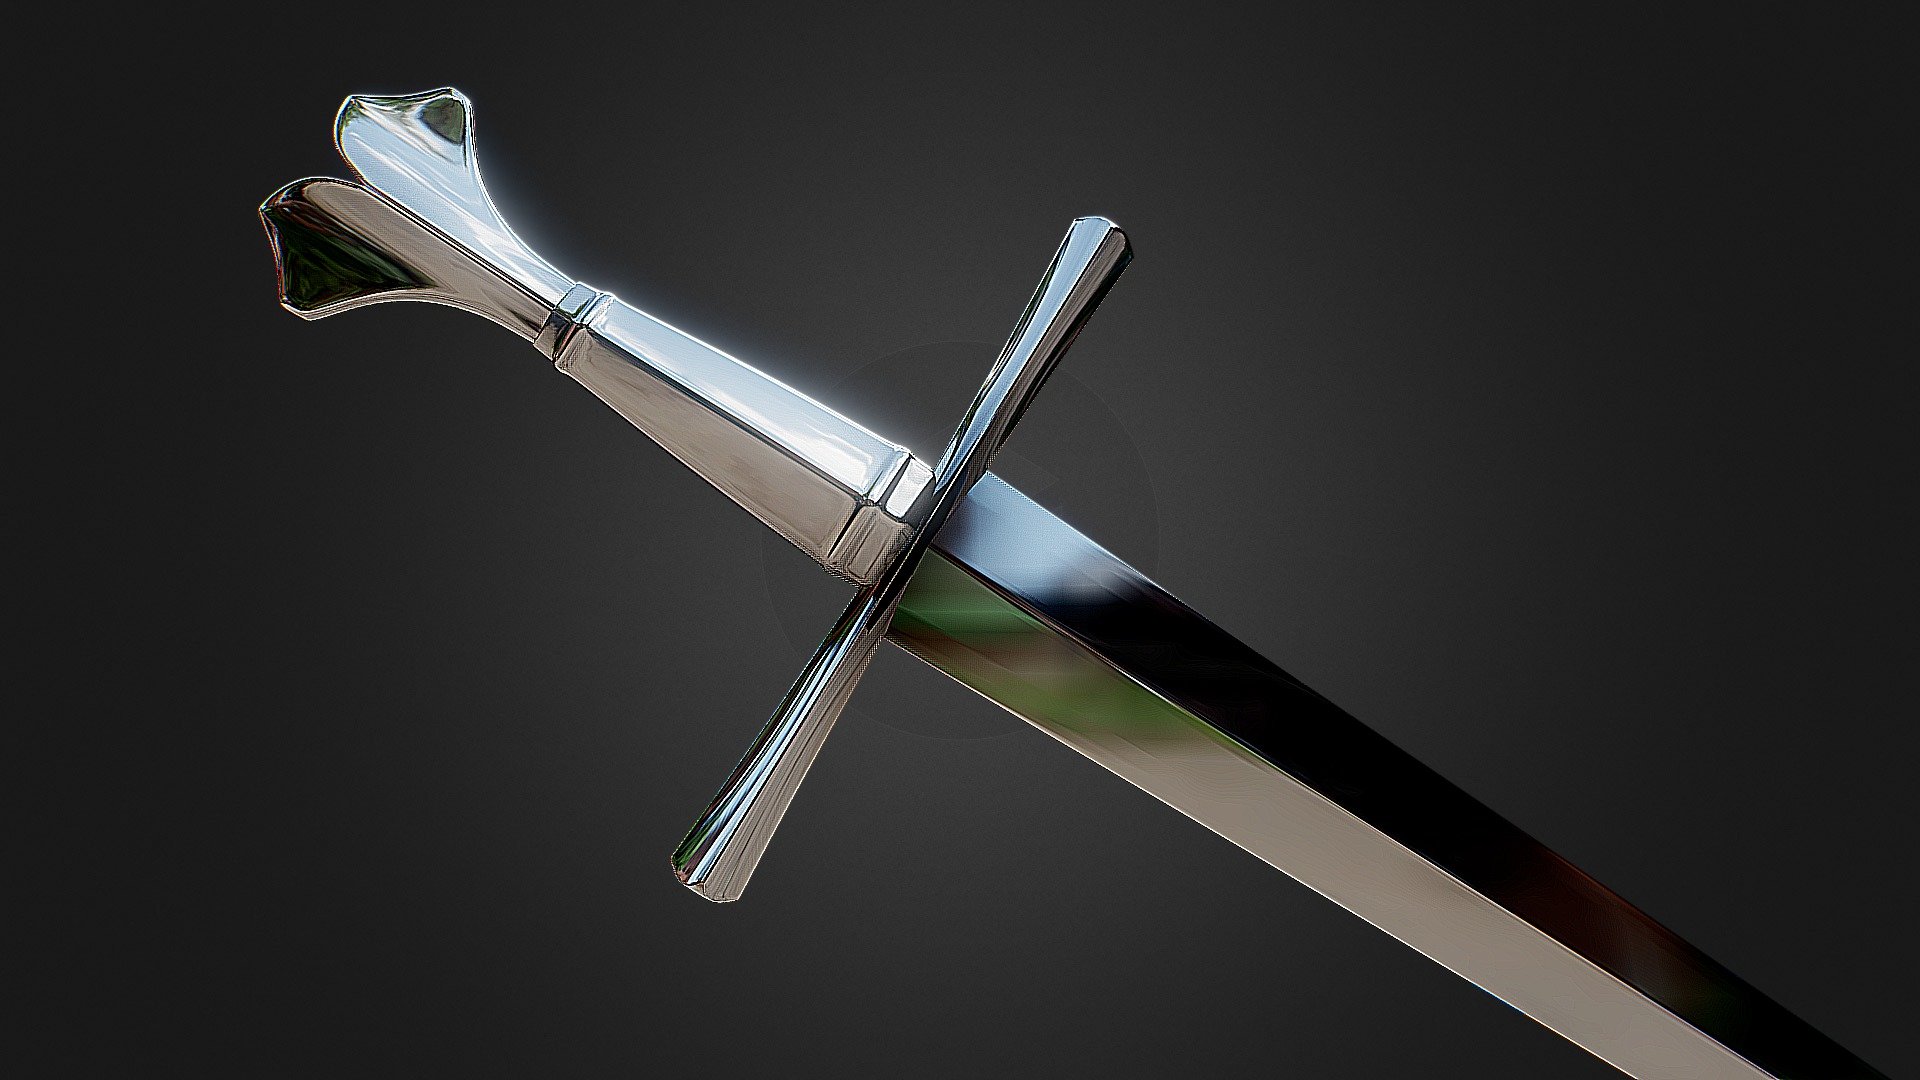 Highpoly model, no textures - Sword 312 Estoc - 3D model by the Georgeous (@thegeorgeous) 3d model